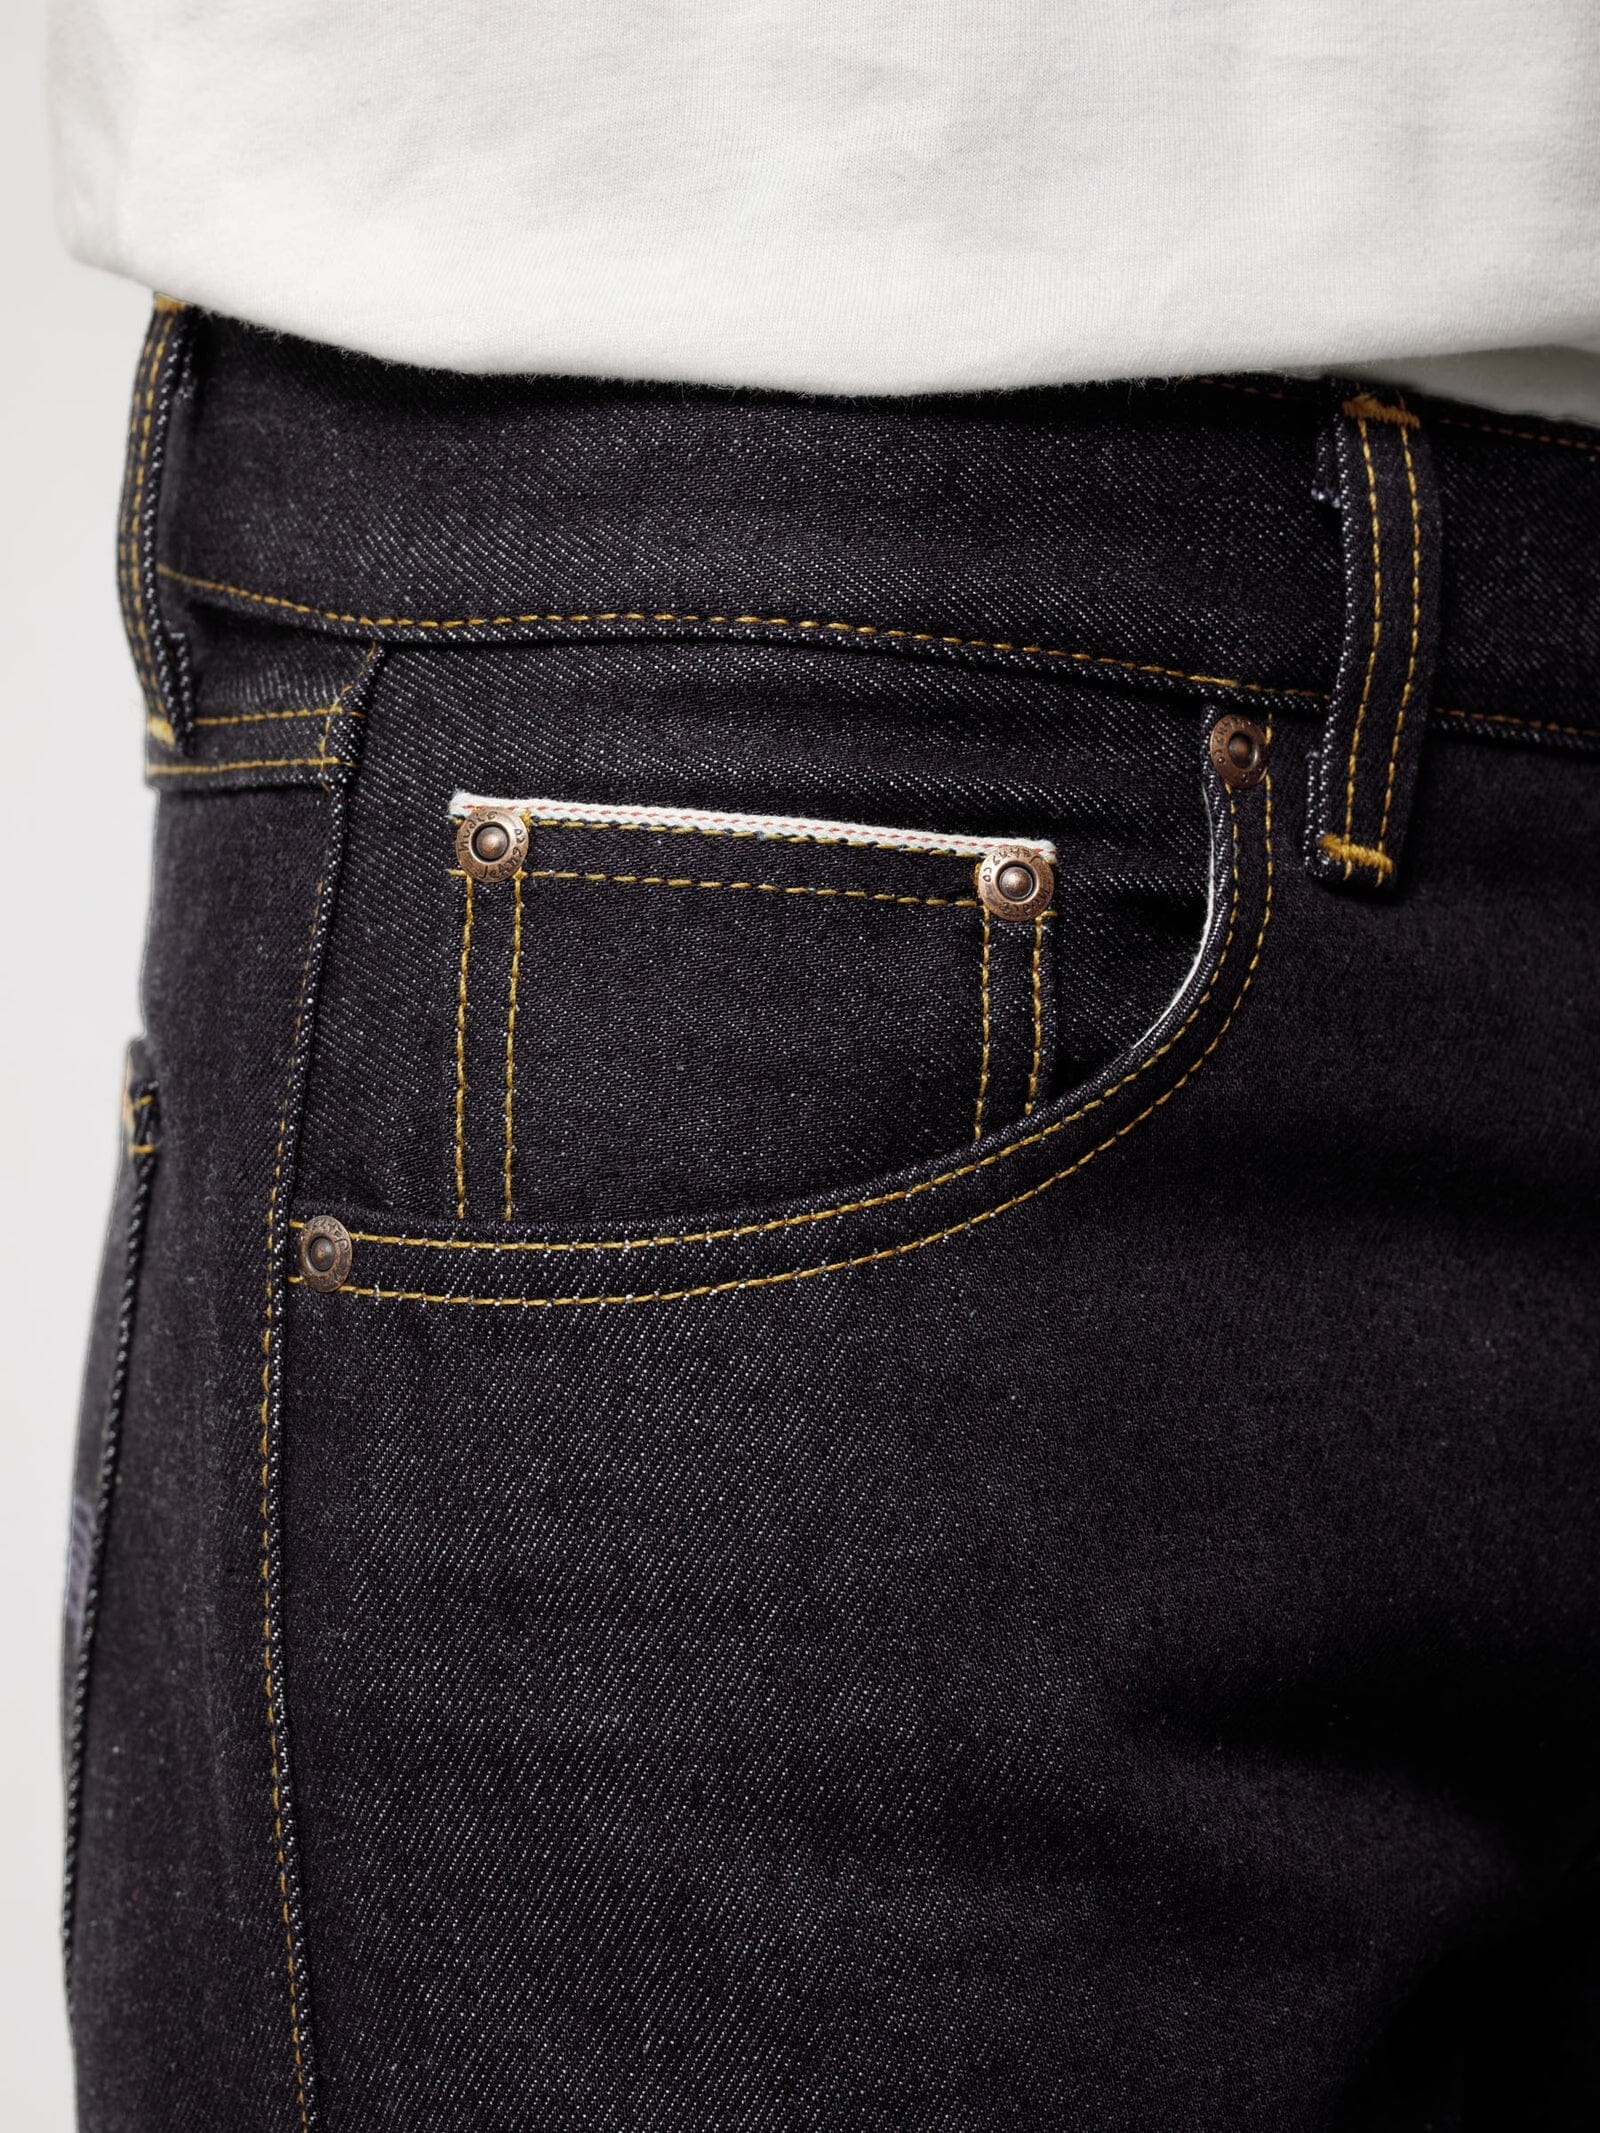 Nudie Jeans Co. - Gritty Jackson Dry Maze Selvage - City Workshop Men's Supply Co.